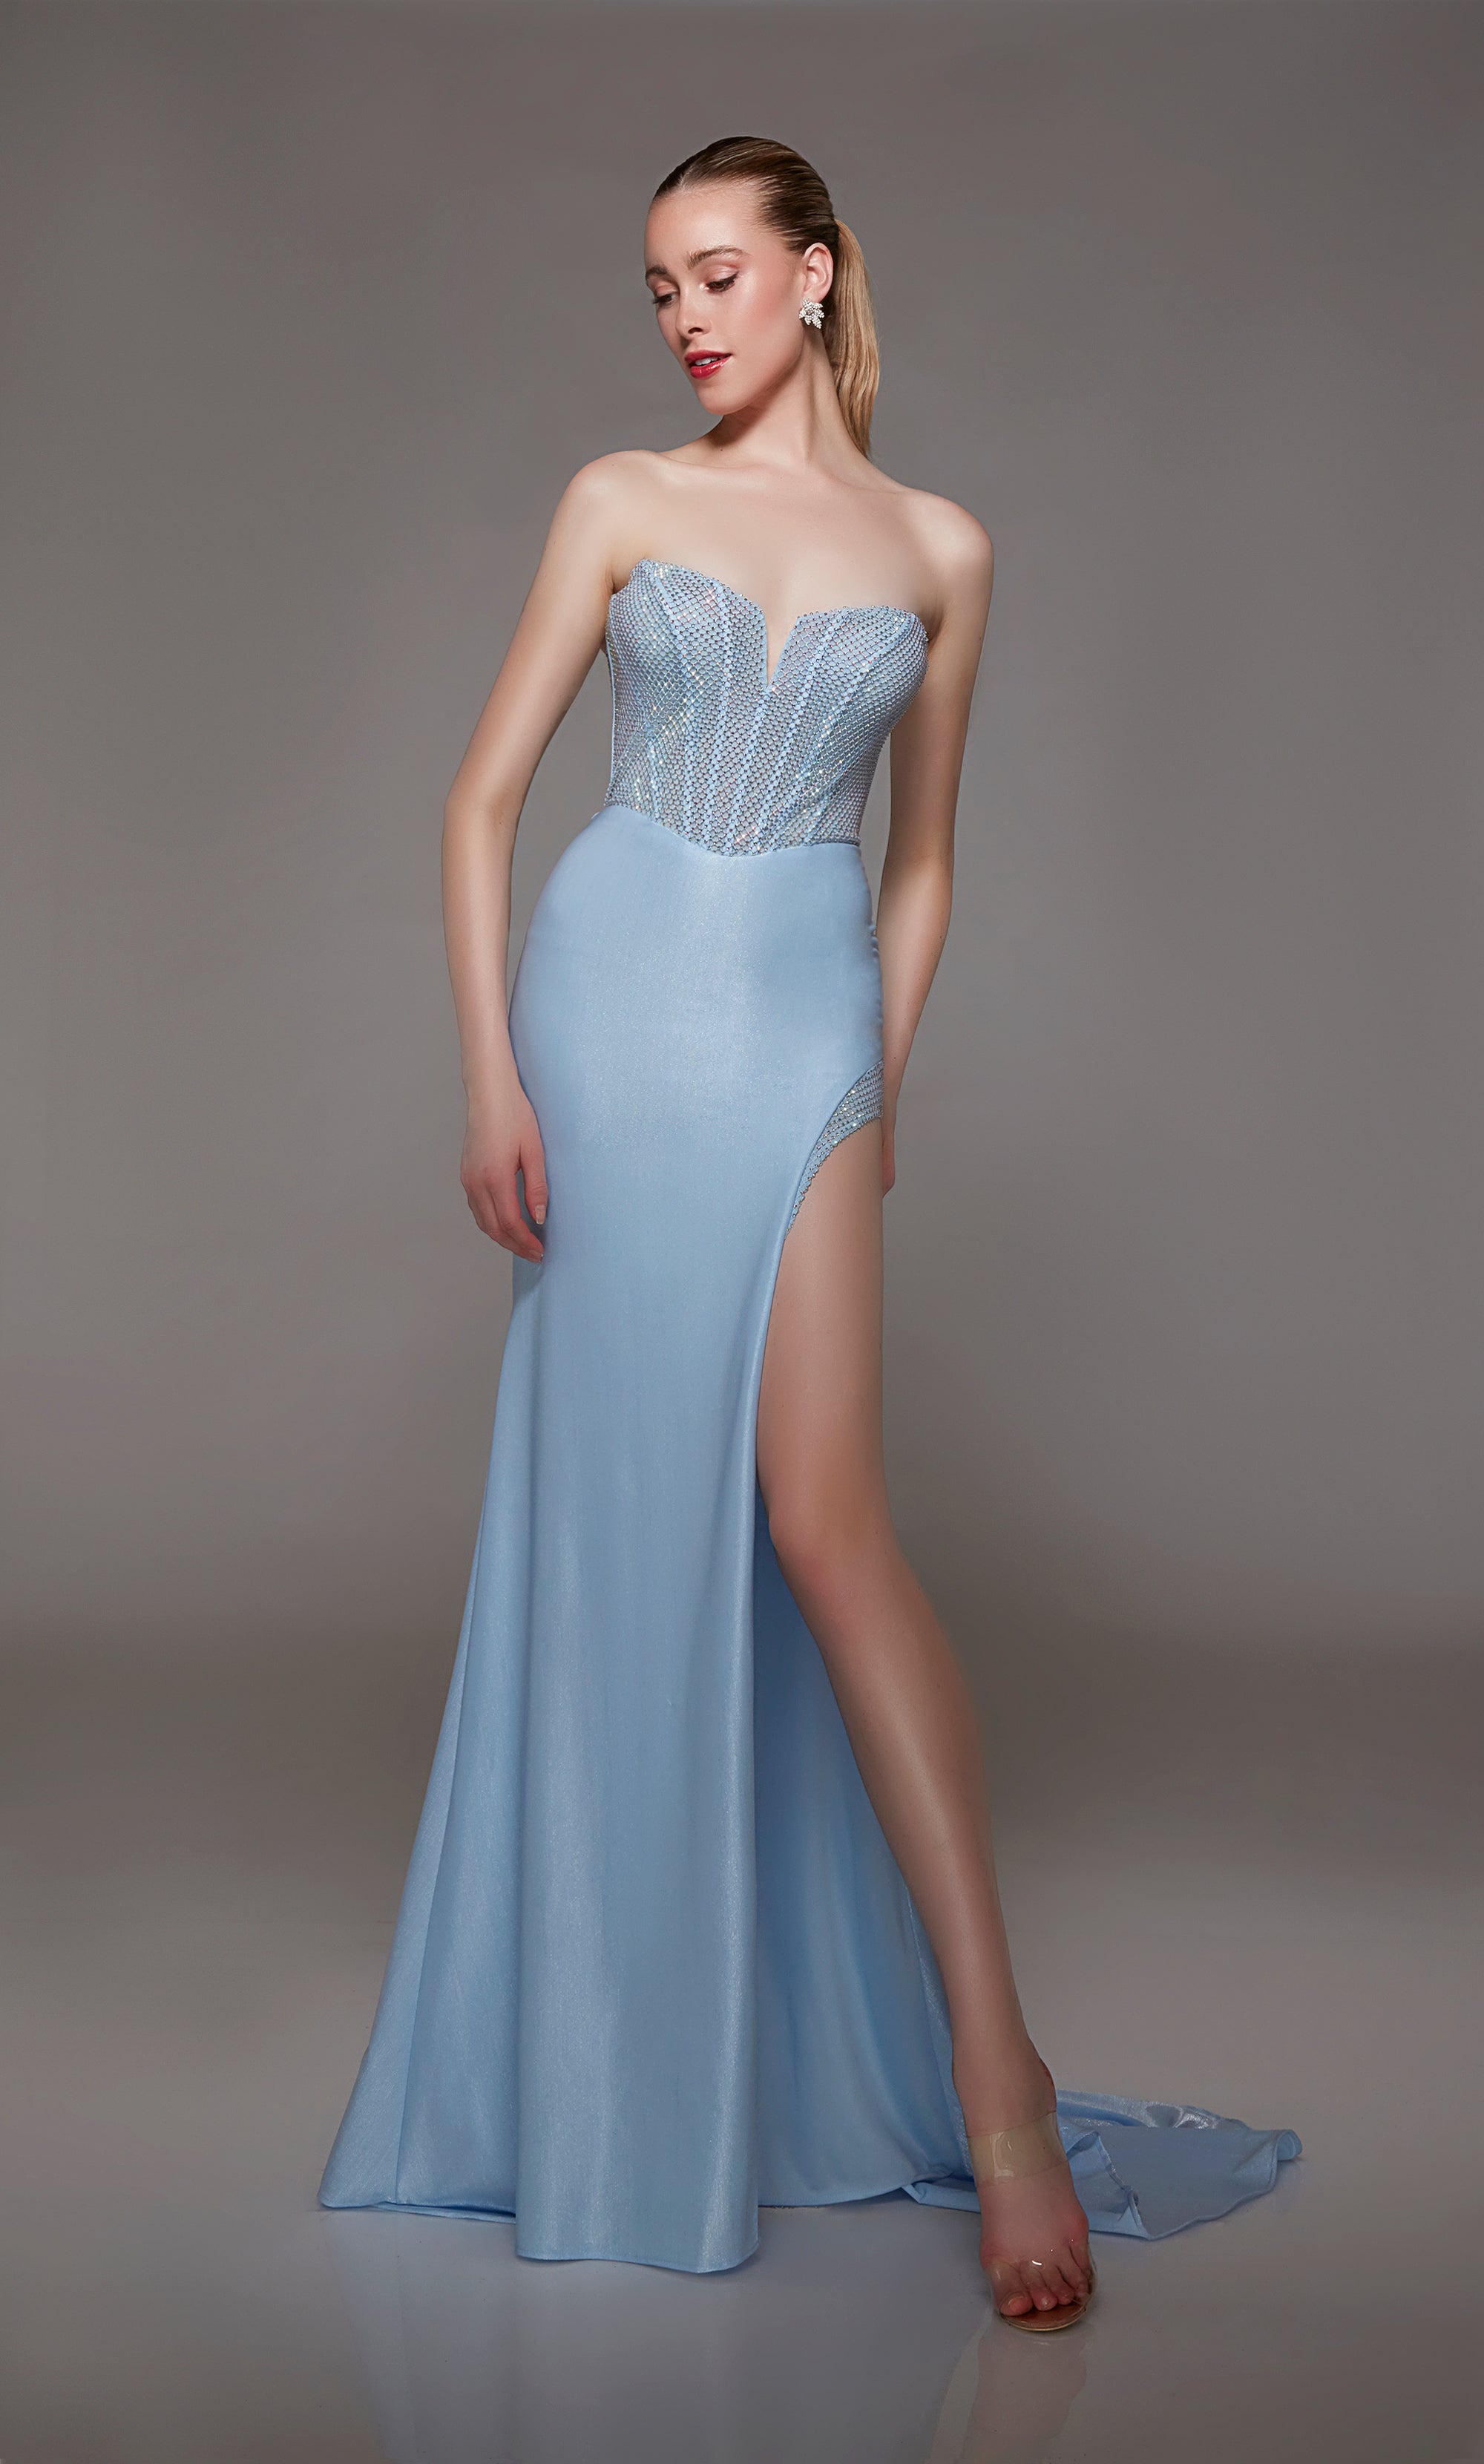 Glacier blue strapless prom dress: Shimmery hotfix rhinestone-adorned corset top, metallic stretch jersey skirt with daring side slit and train, zip-up back for an glamorous look.